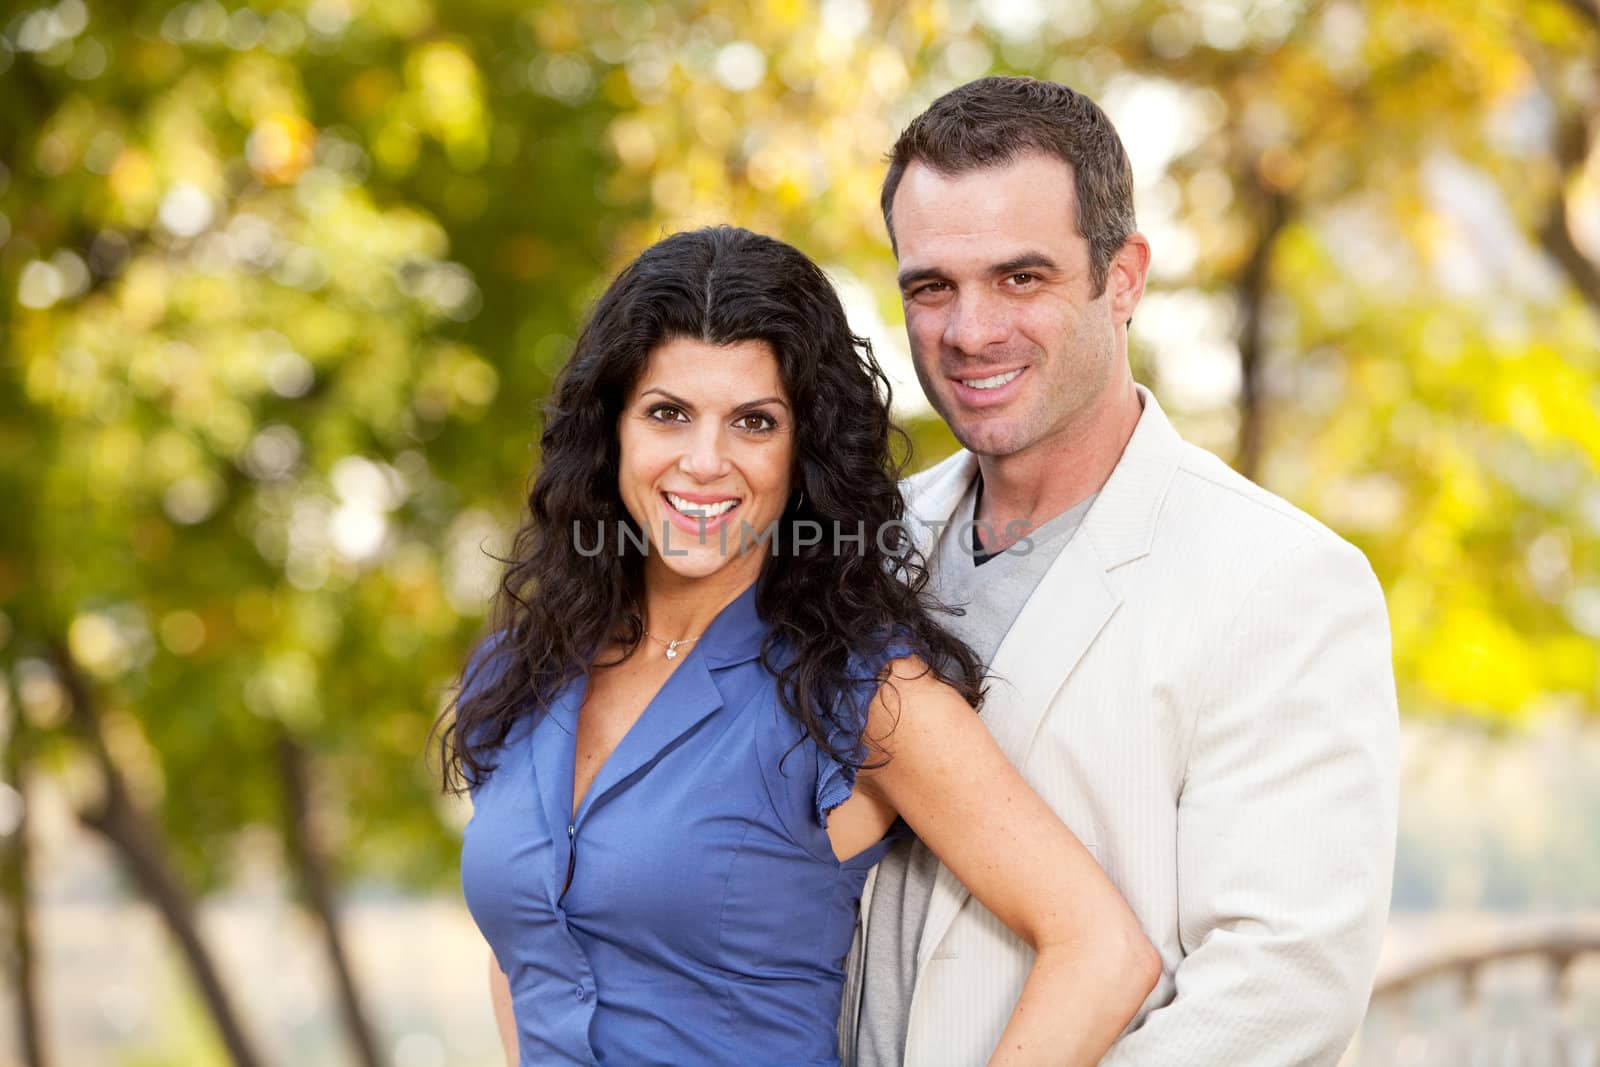 A portrait of a happy male and female in a park